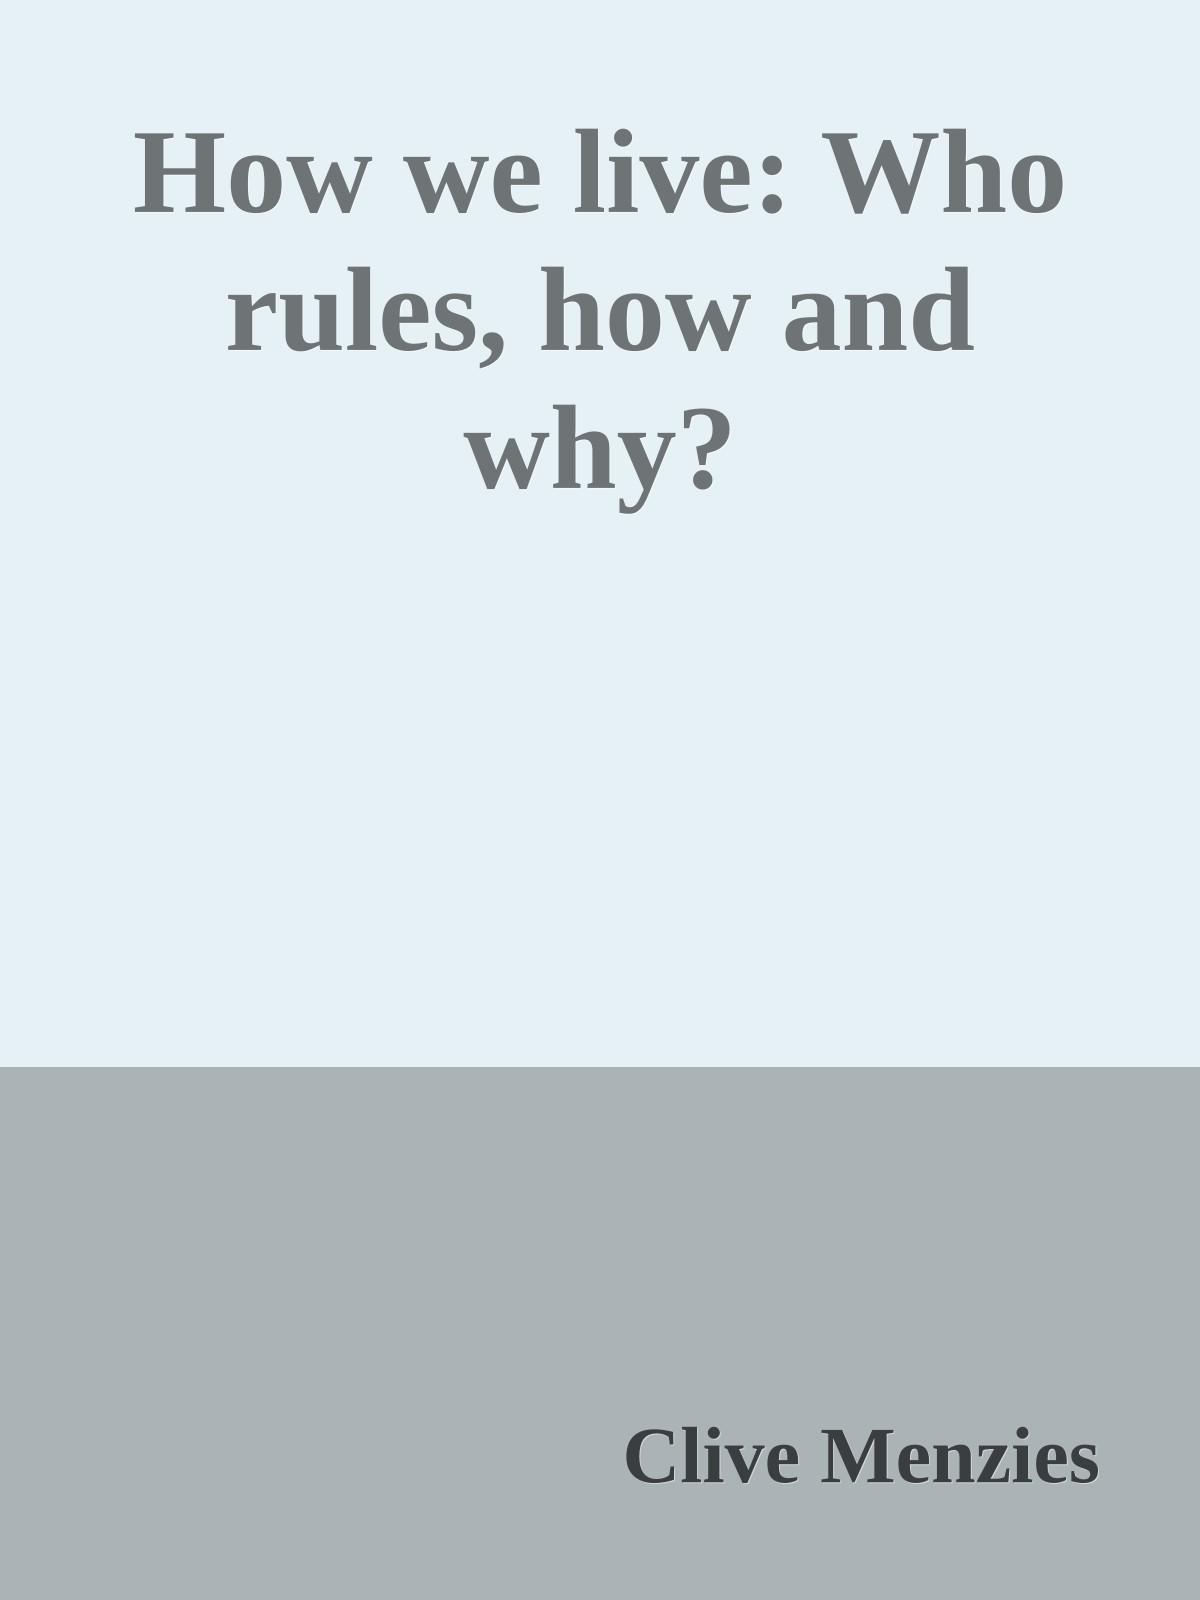 How we live: Who rules, how and why? (2019) by Clive Menzies